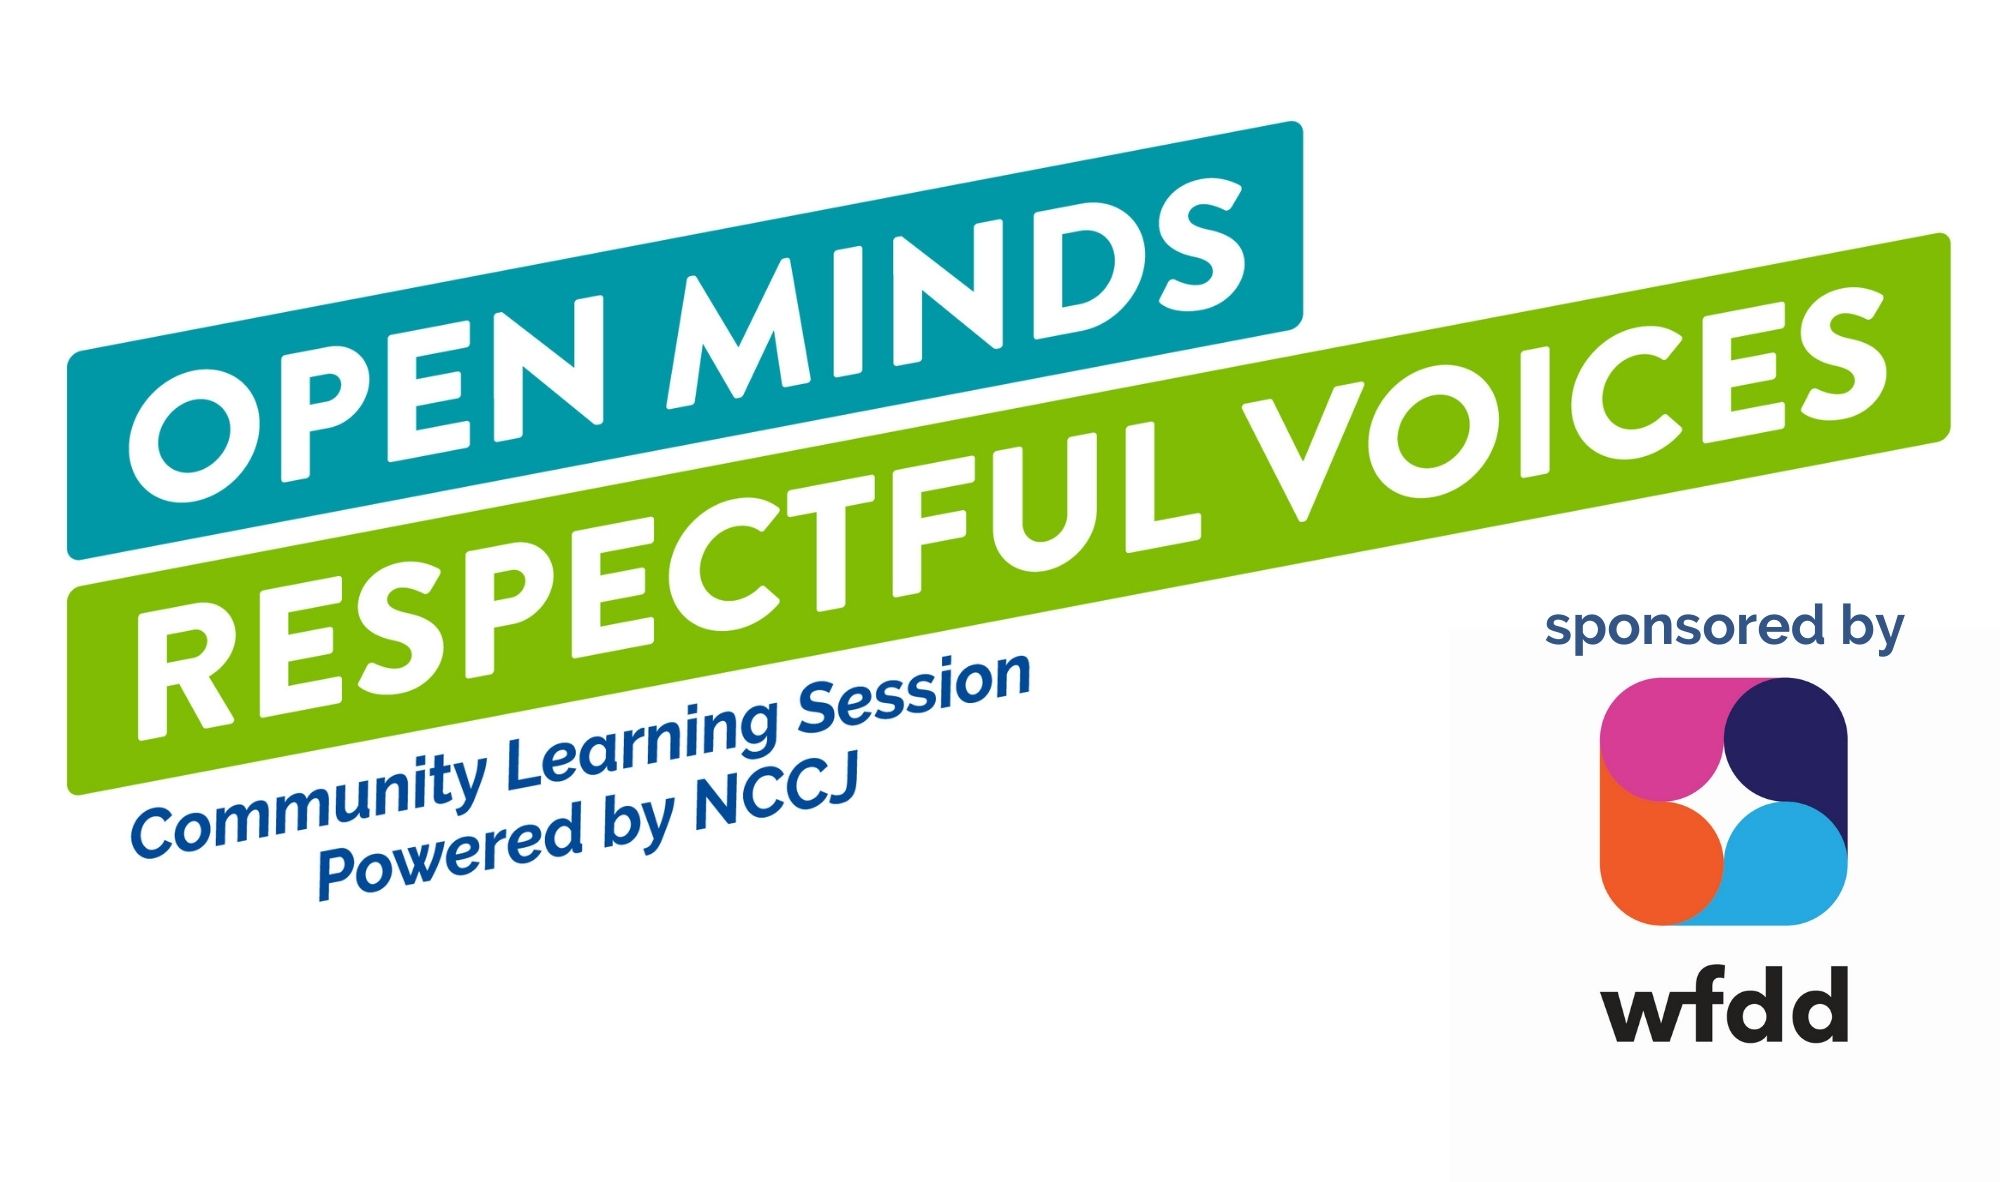 NCCJ's Open Minds, Respectful Voices Community Learning Sessions are sponsored by WFDD